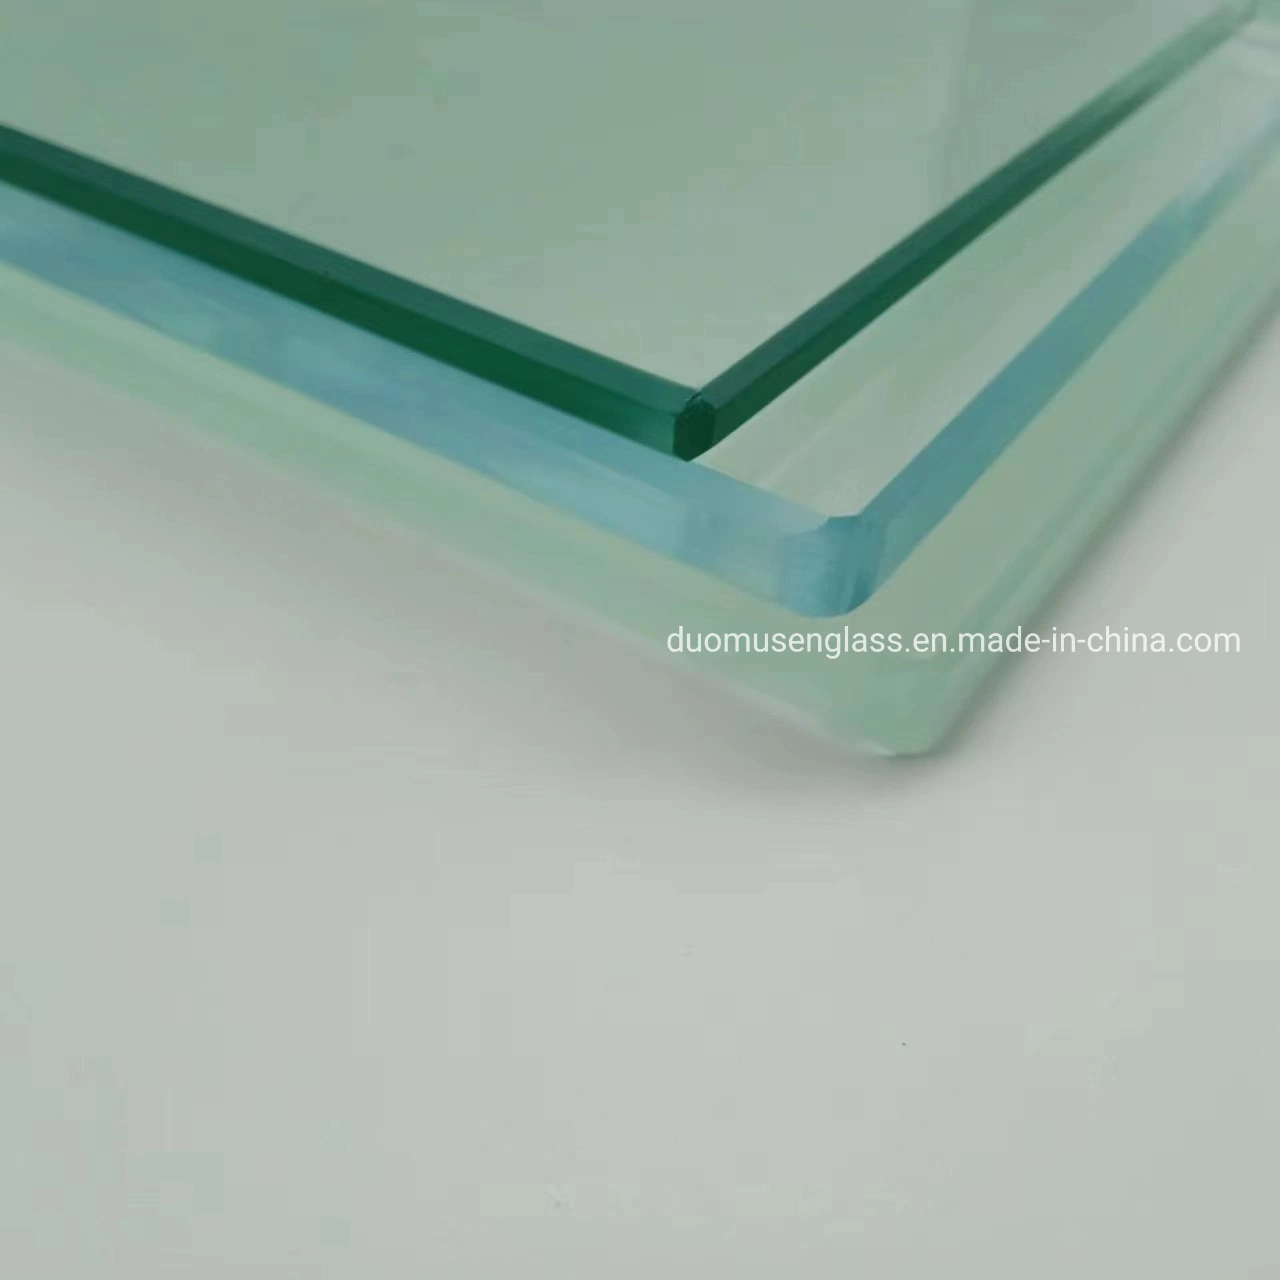 Size Customized Maximum 2000mm X 2500mm Minimum 280mm X 280mm Thickness 8mm Processing Shower Enclosure Toughened Glass Tempered Glass